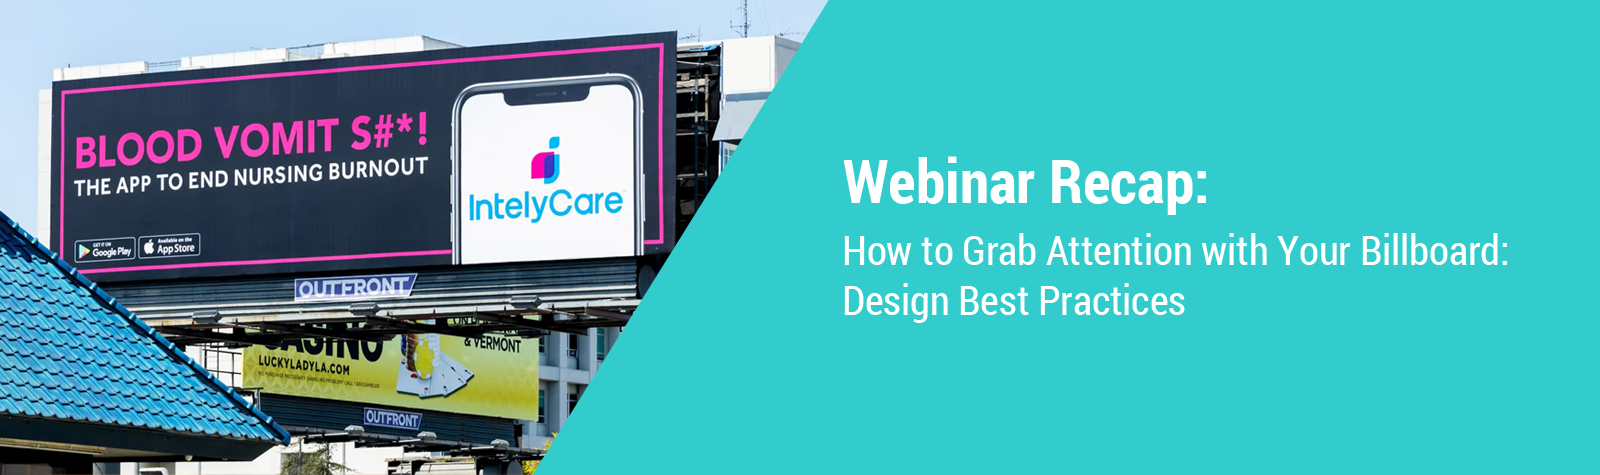 Webinar Recap: How to Grab Attention with Your Billboard: Design Best Practices